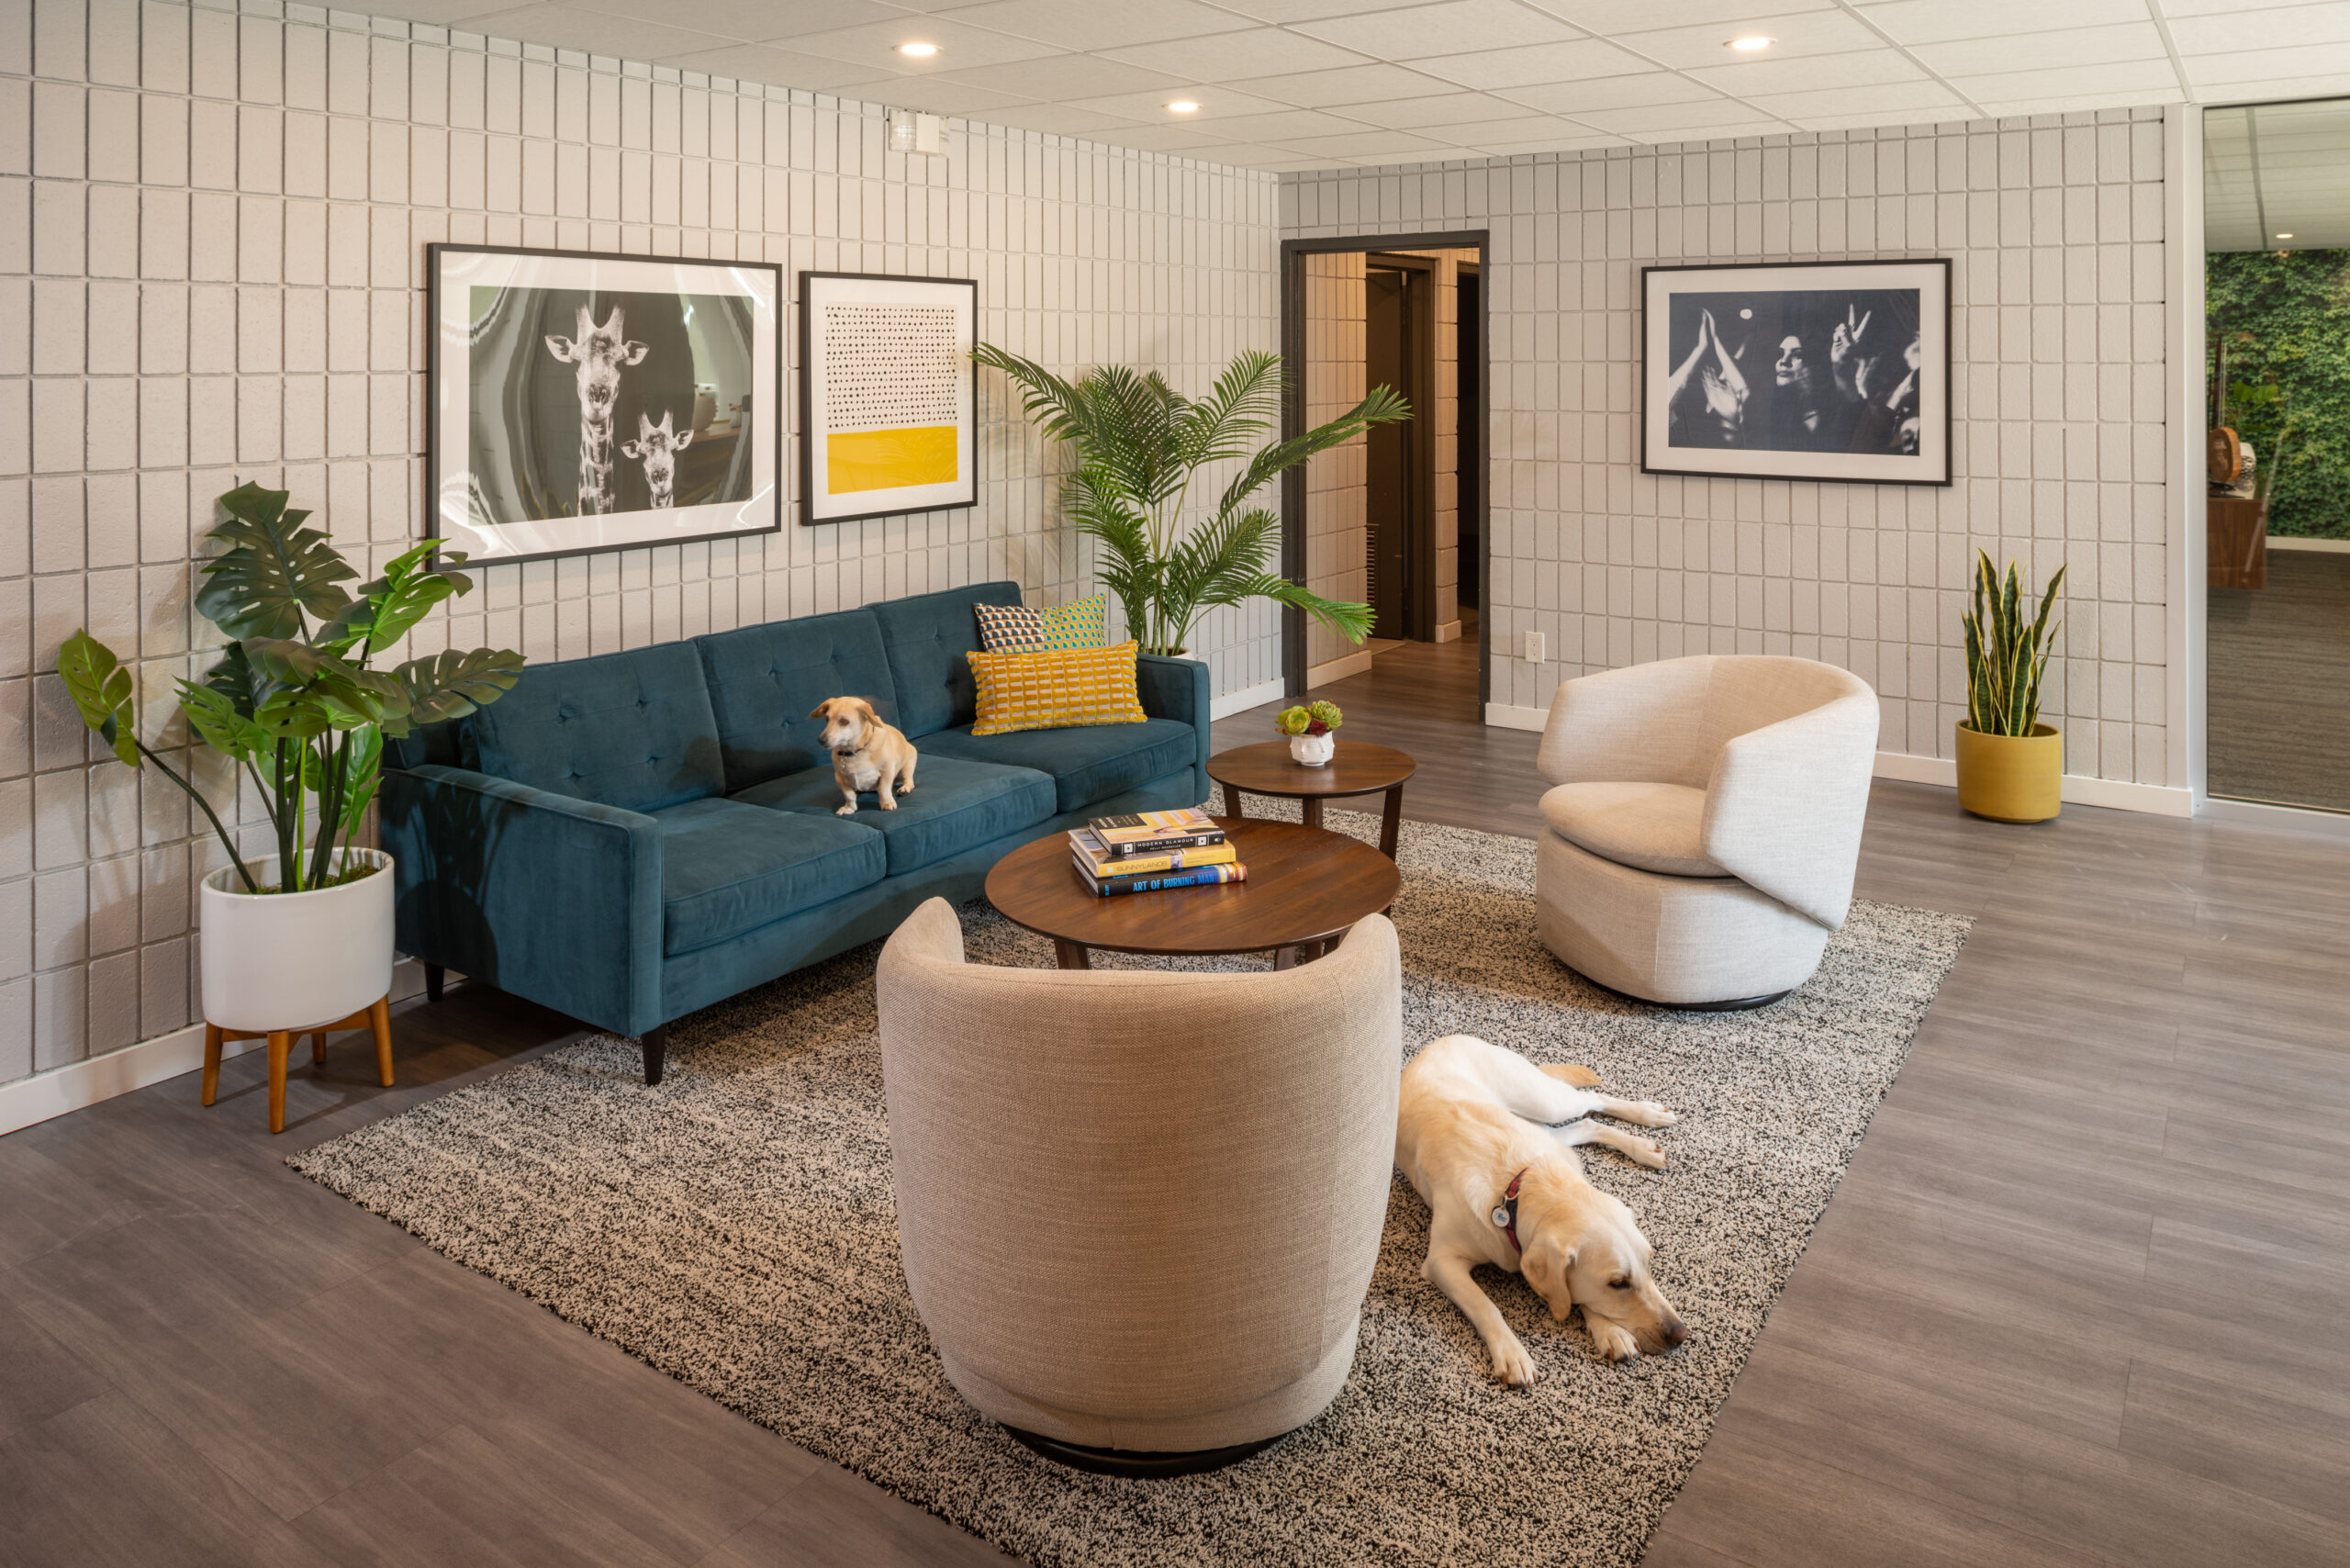 interior apartment area with sofa, chairs, table, wall art decor and two dogs